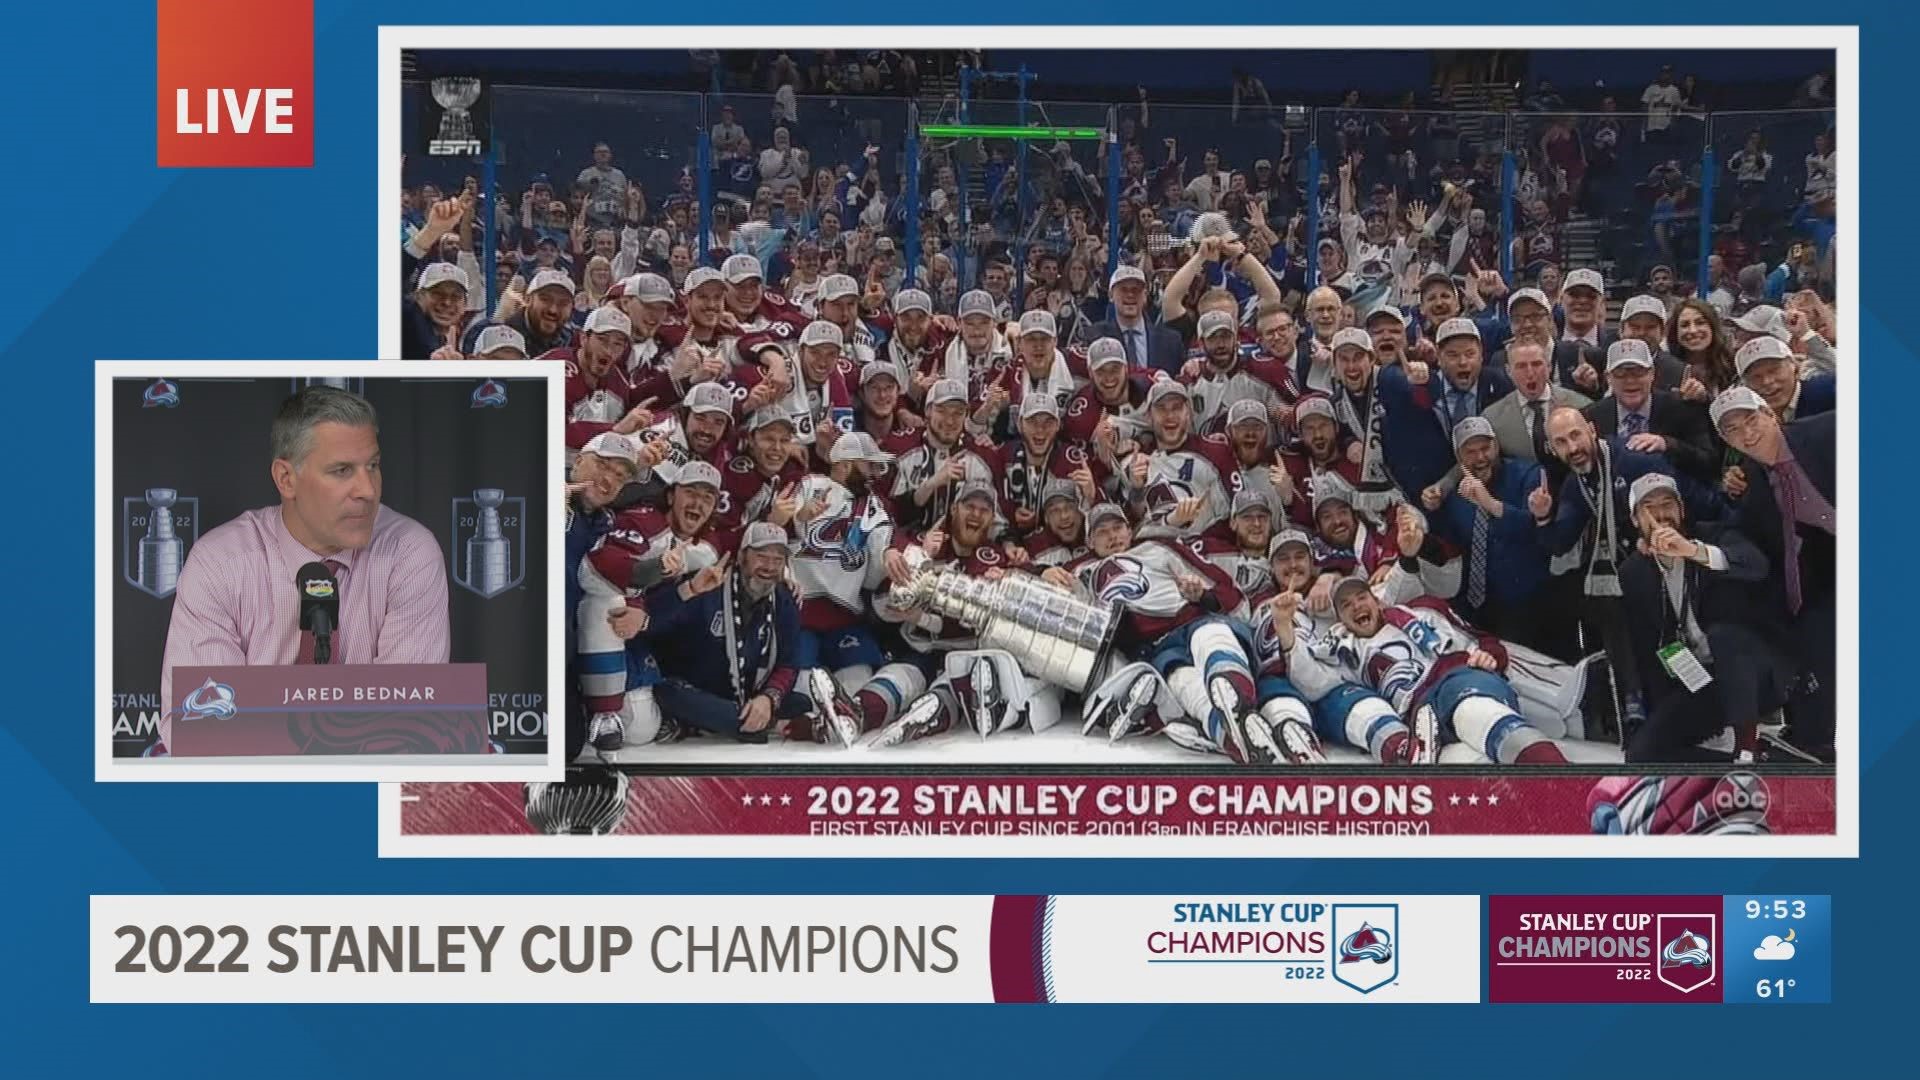 Head coach Jared Bednar and general manager Joe Sakic react to the Avalanche Stanley Cup victory.